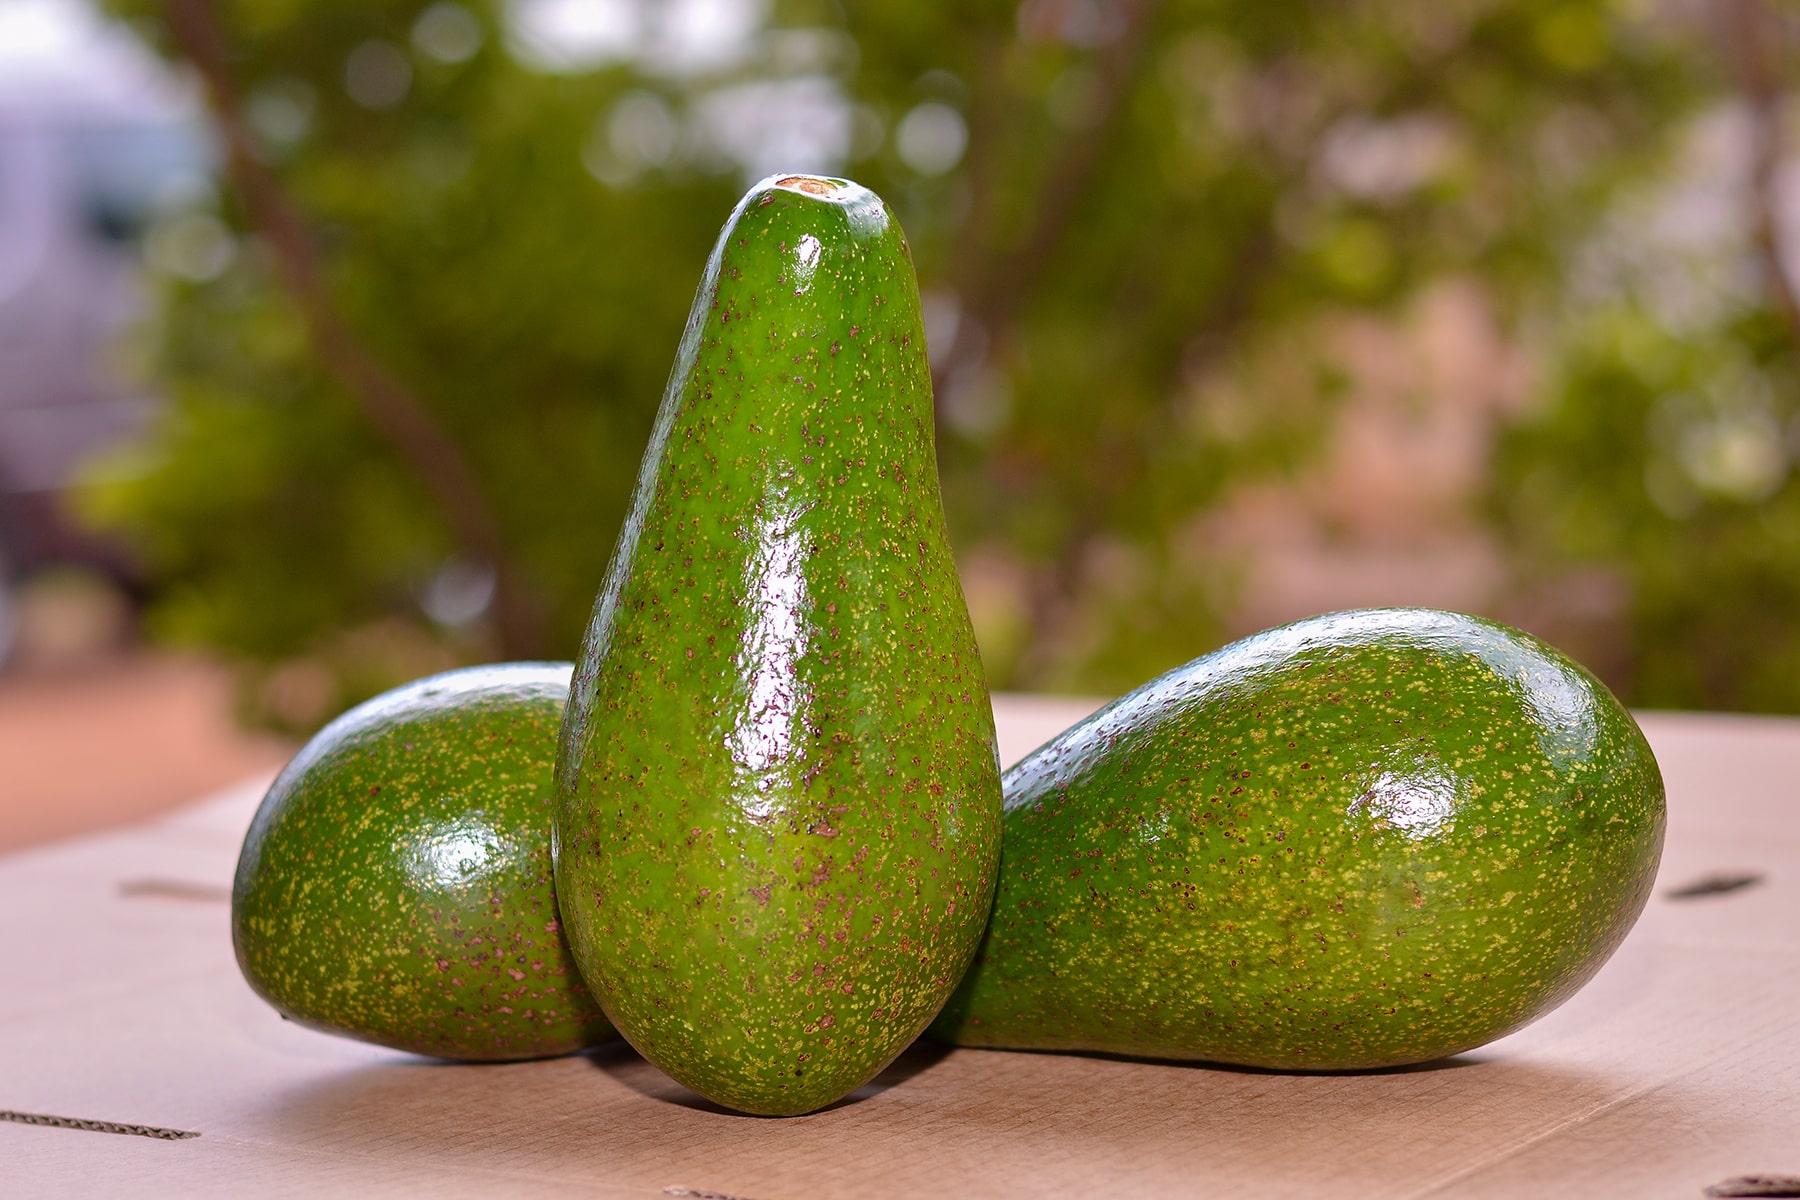 Avocados for export and sale